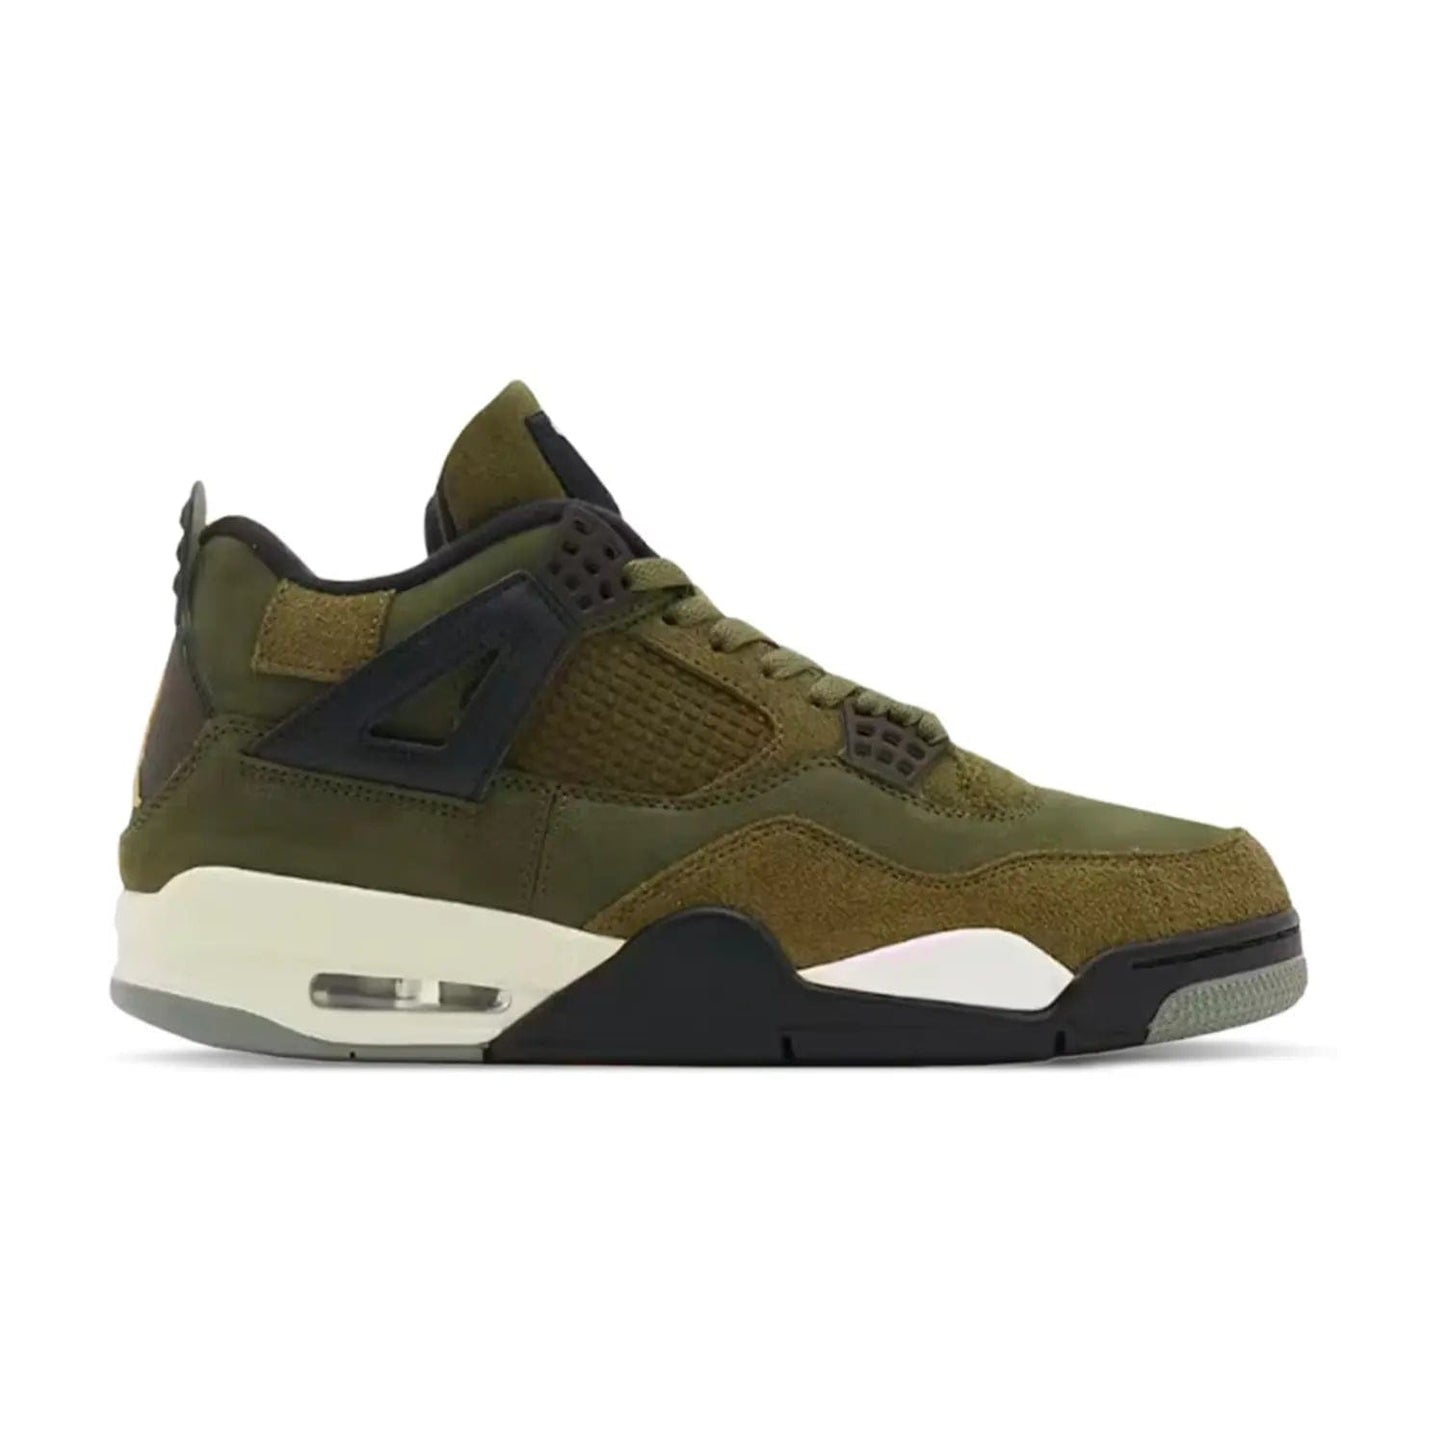 Jordan 4 Retro SE Craft Medium Olive (GS) - Image 1 - Only at www.BallersClubKickz.com - A stylish and timeless Jordan 4 Retro SE Craft sneaker with Medium Olive, Pale Vanilla, Khaki, Black and Sail colors. Breathable upper and cushioning for all-day comfort. Get yours today!